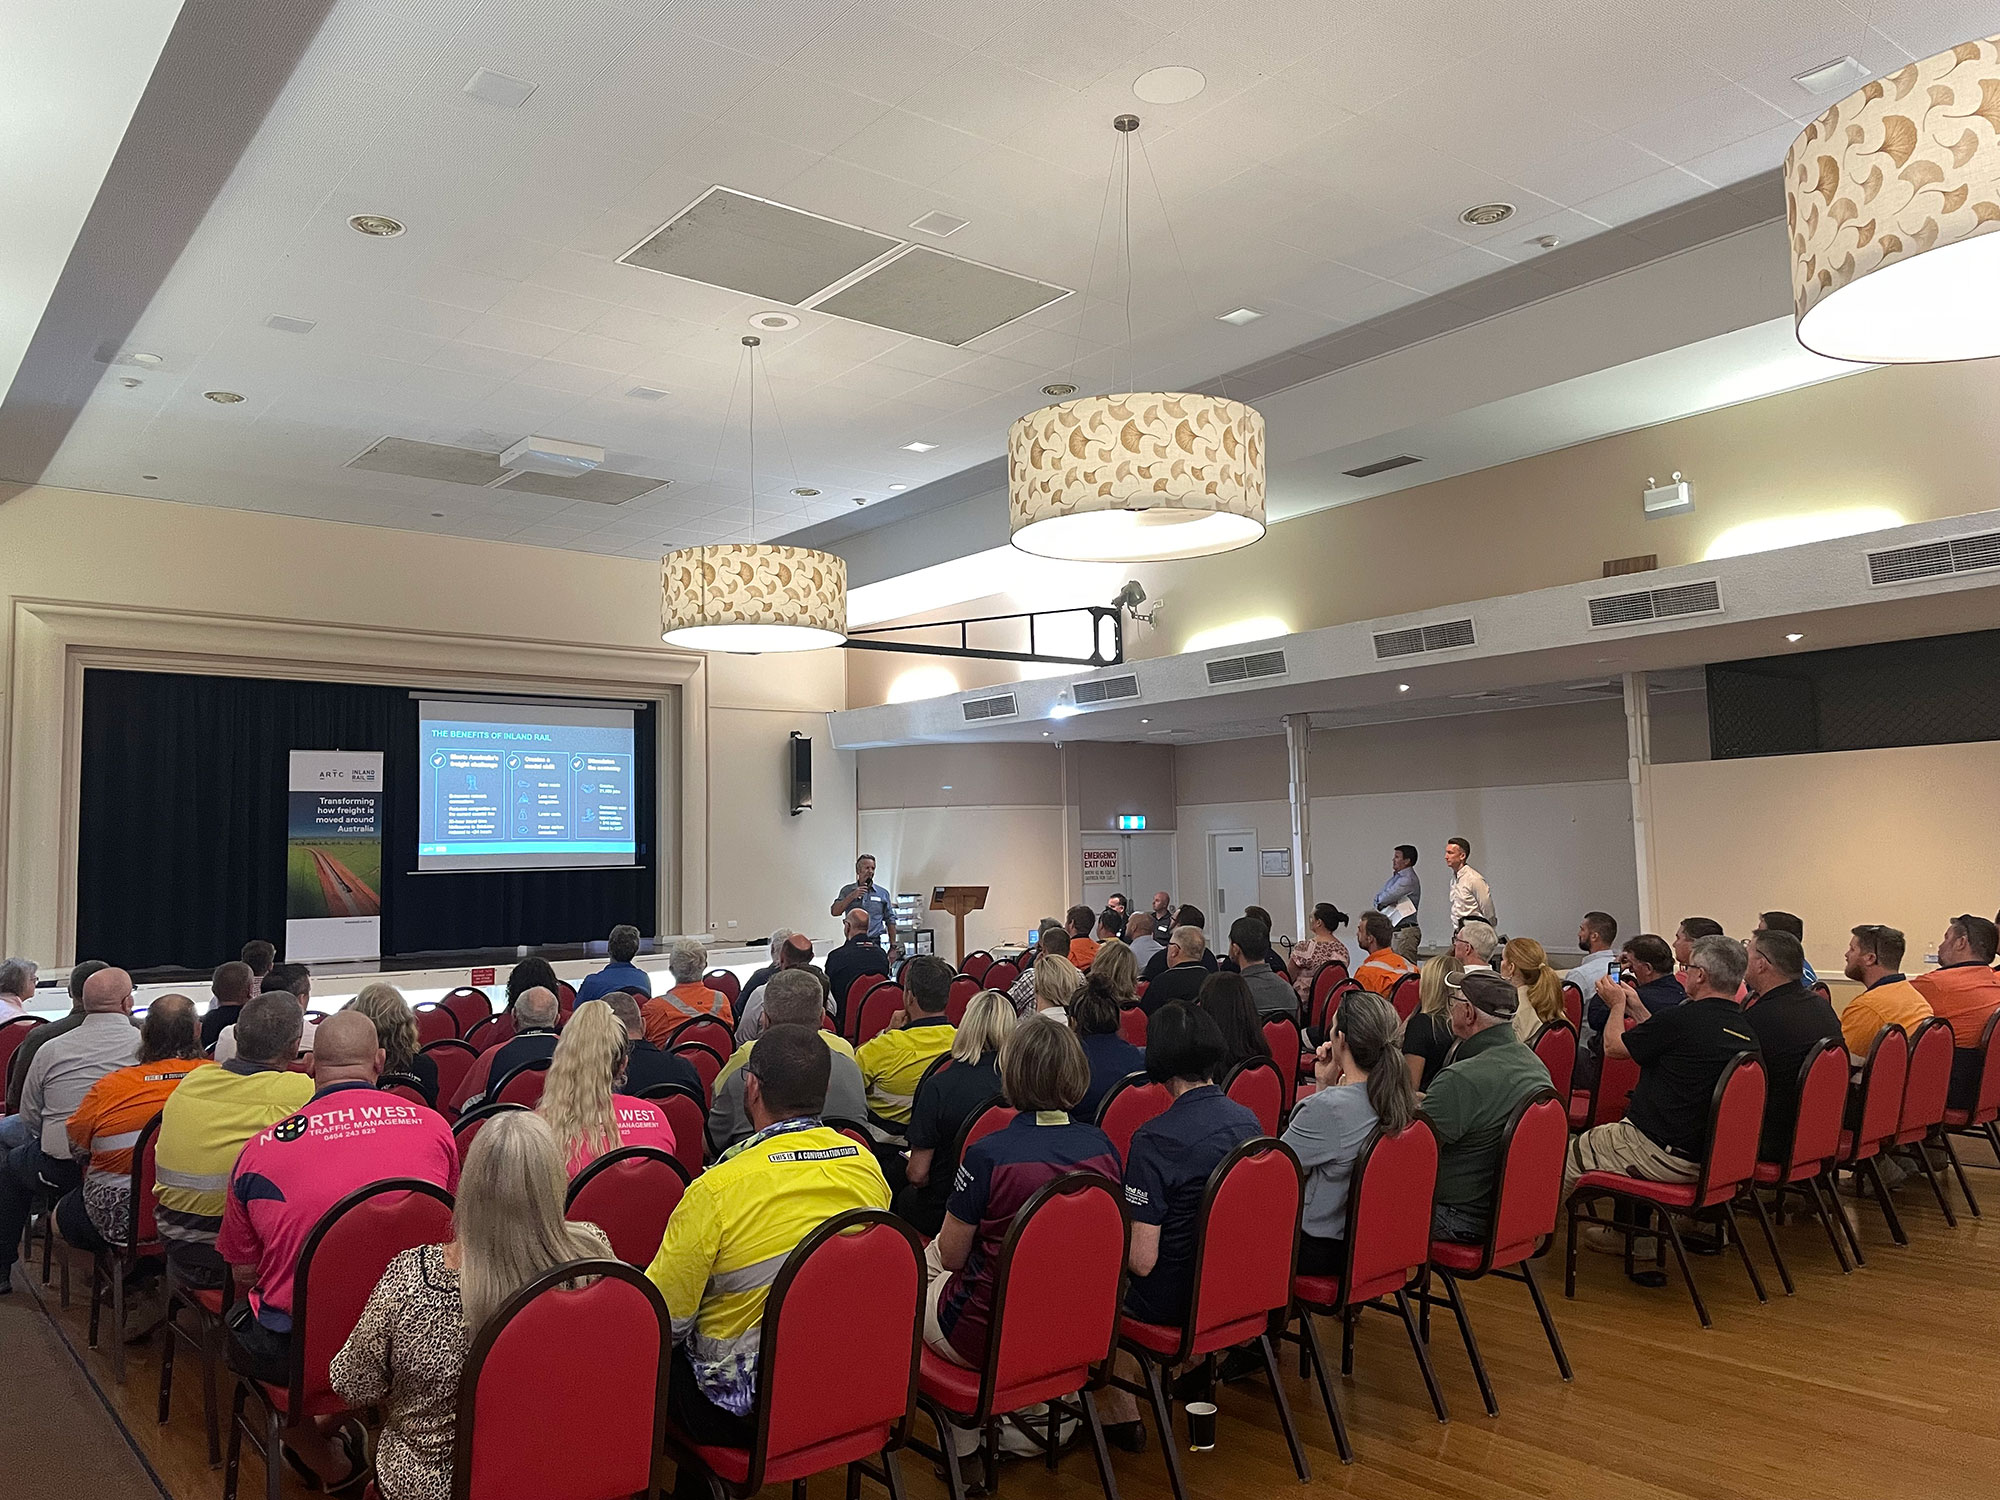 Project Director Adam Barber addressing the audience at the Meet the Preferred Contractor event in Moree on 9 February